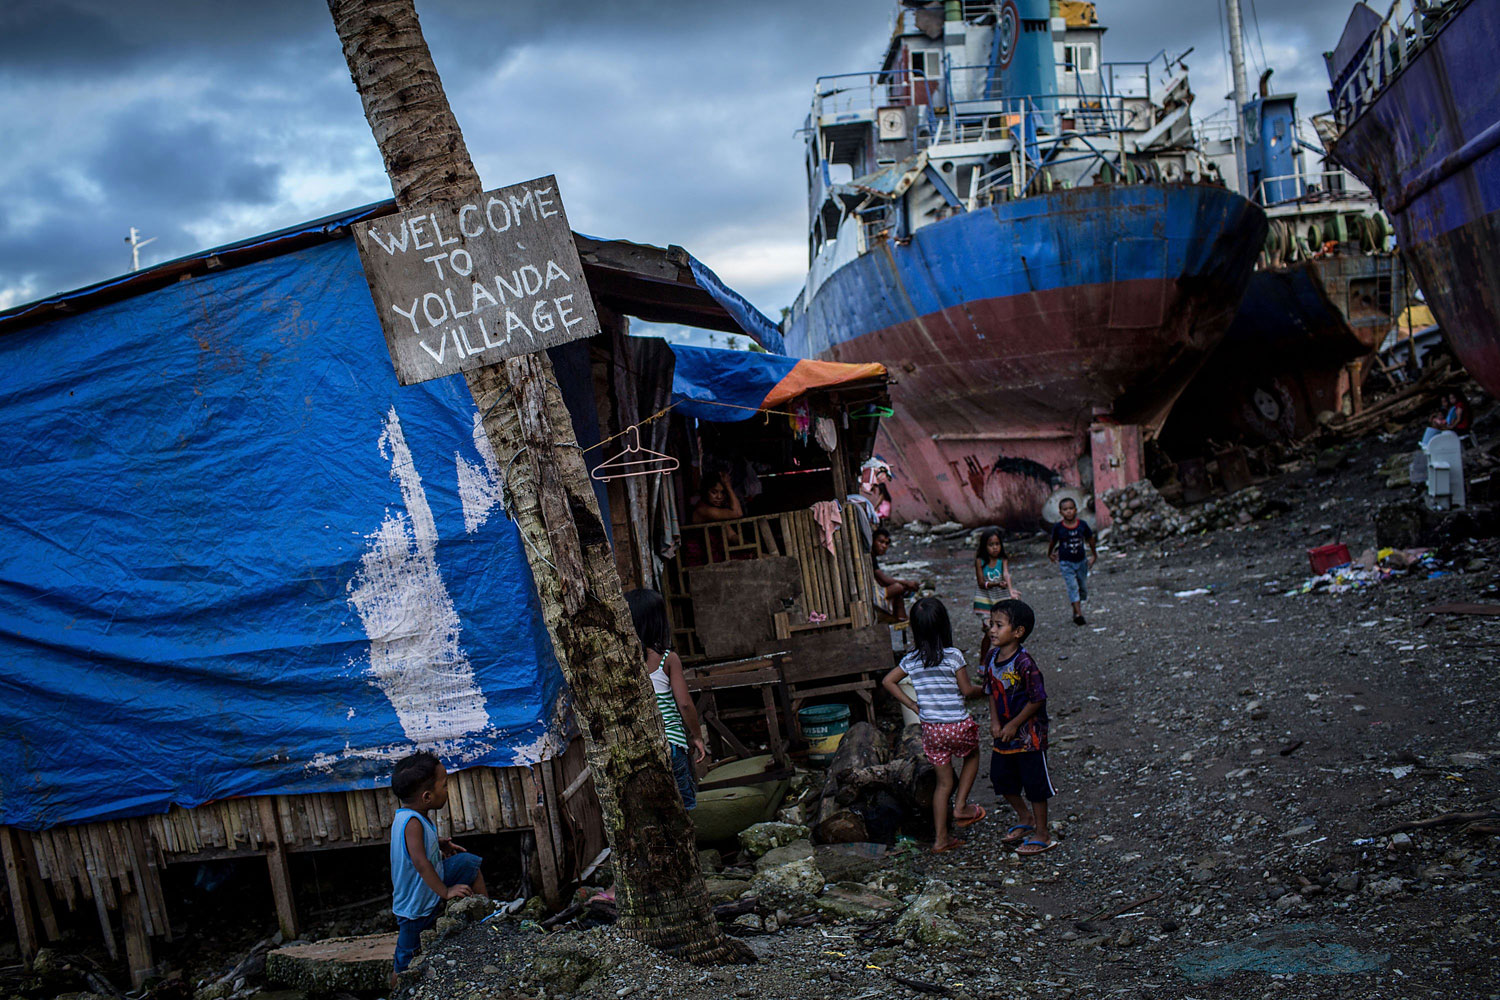 Children play around three large ships grounded by Typhoon Haiyan on April 18, 2014 in Tacloban.